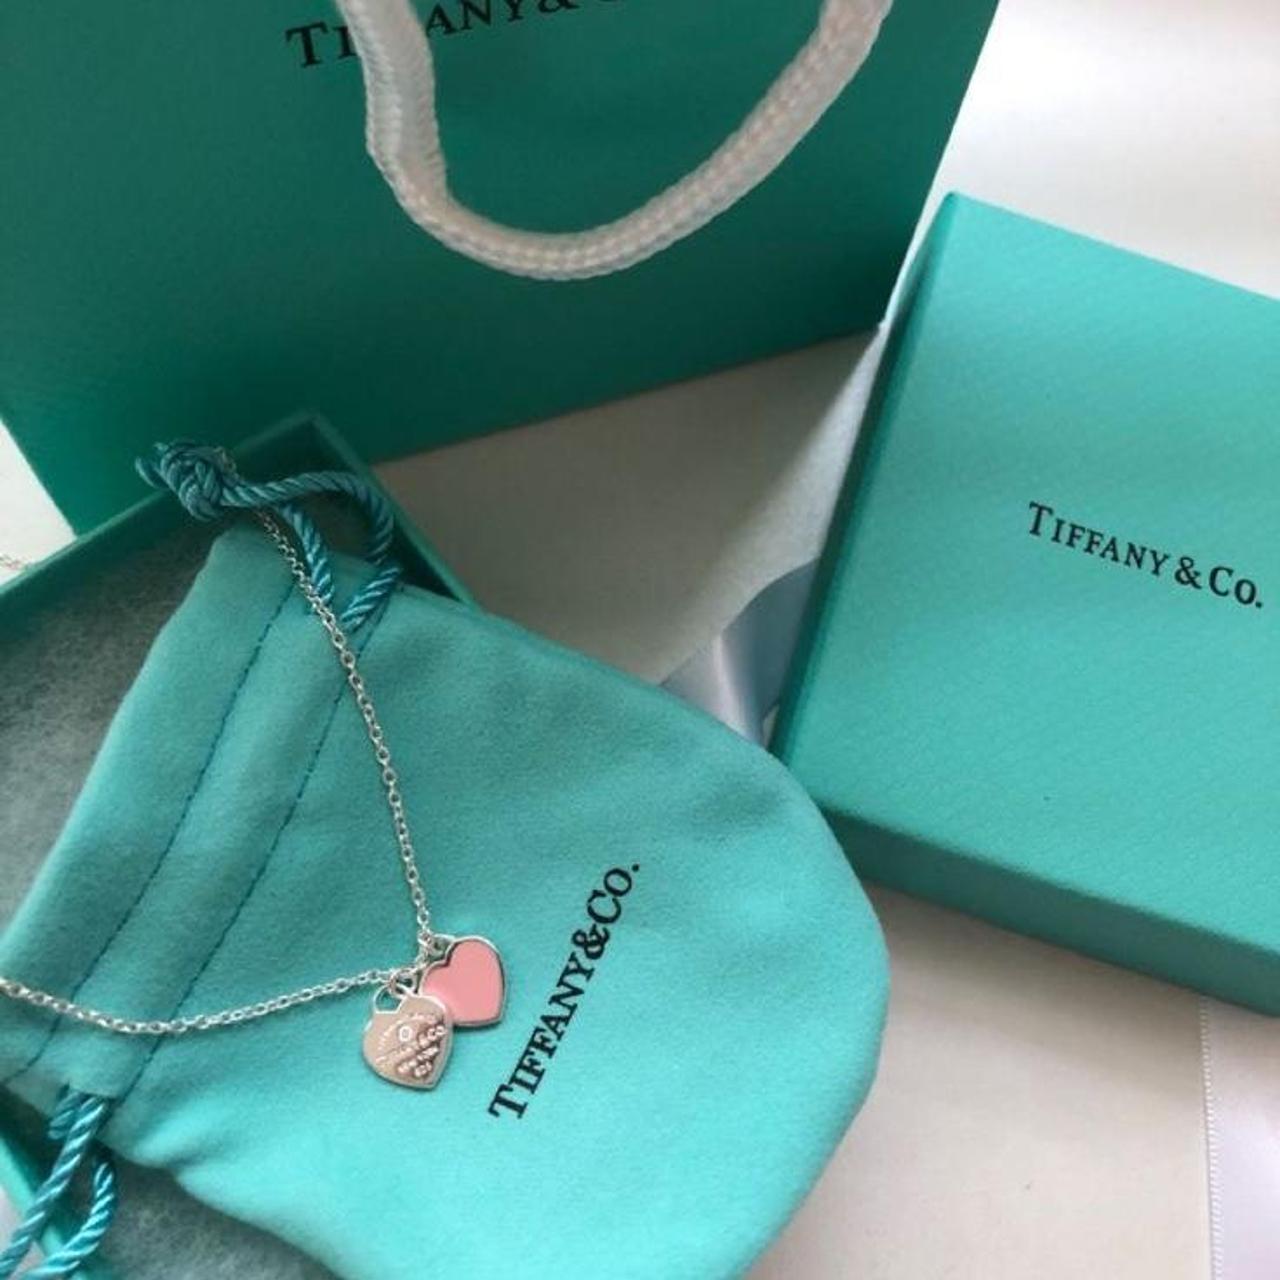 tiffany and co pink heart necklace #trendy #pink - Depop